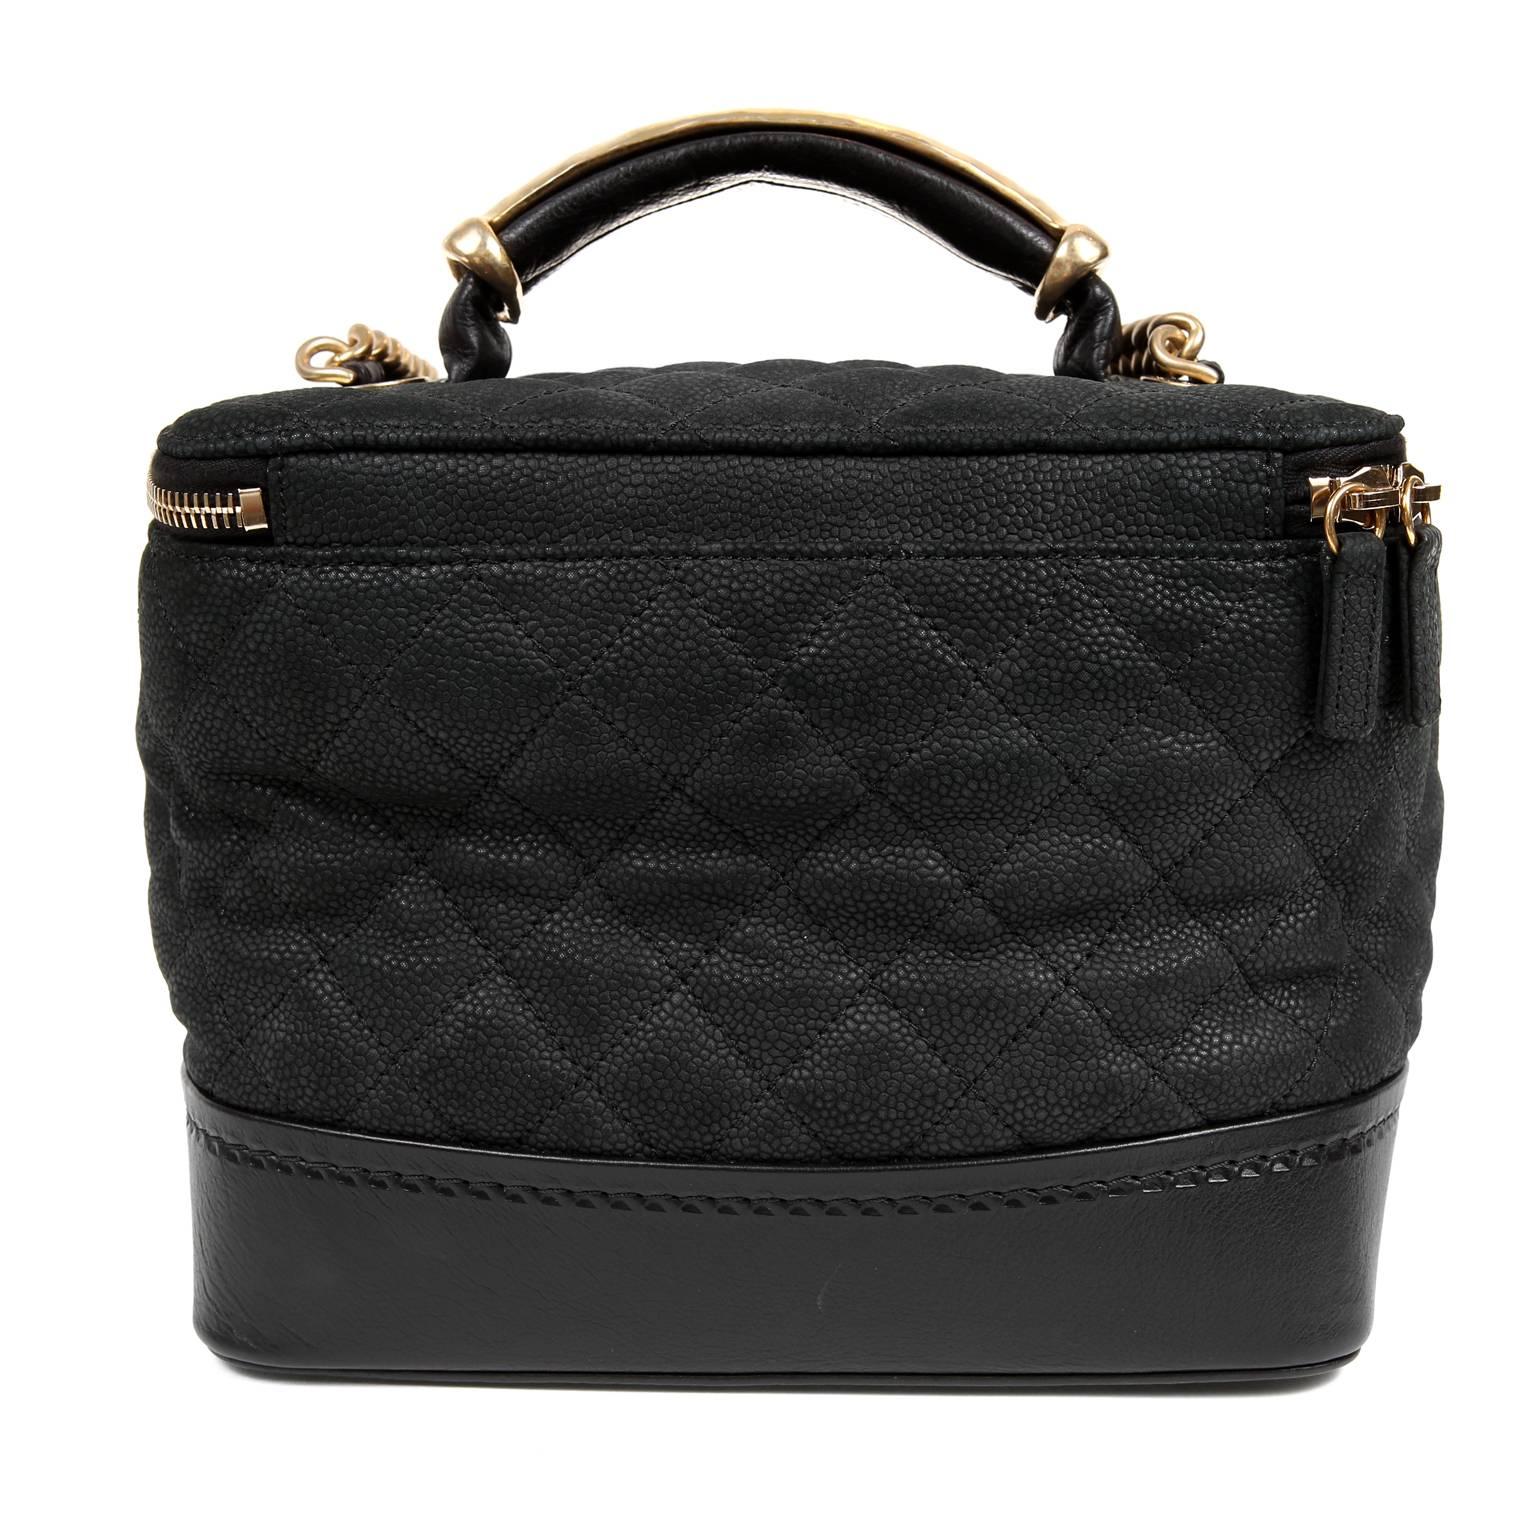 Chanel Black Leather Globetrotter Bag- PRISTINE
  The unique take on a cosmetic travel bag is both stylish and practical.

Textured matte black caviar leather structured bag is quilted in signature Chanel diamond pattern.  Smooth leather surrounds